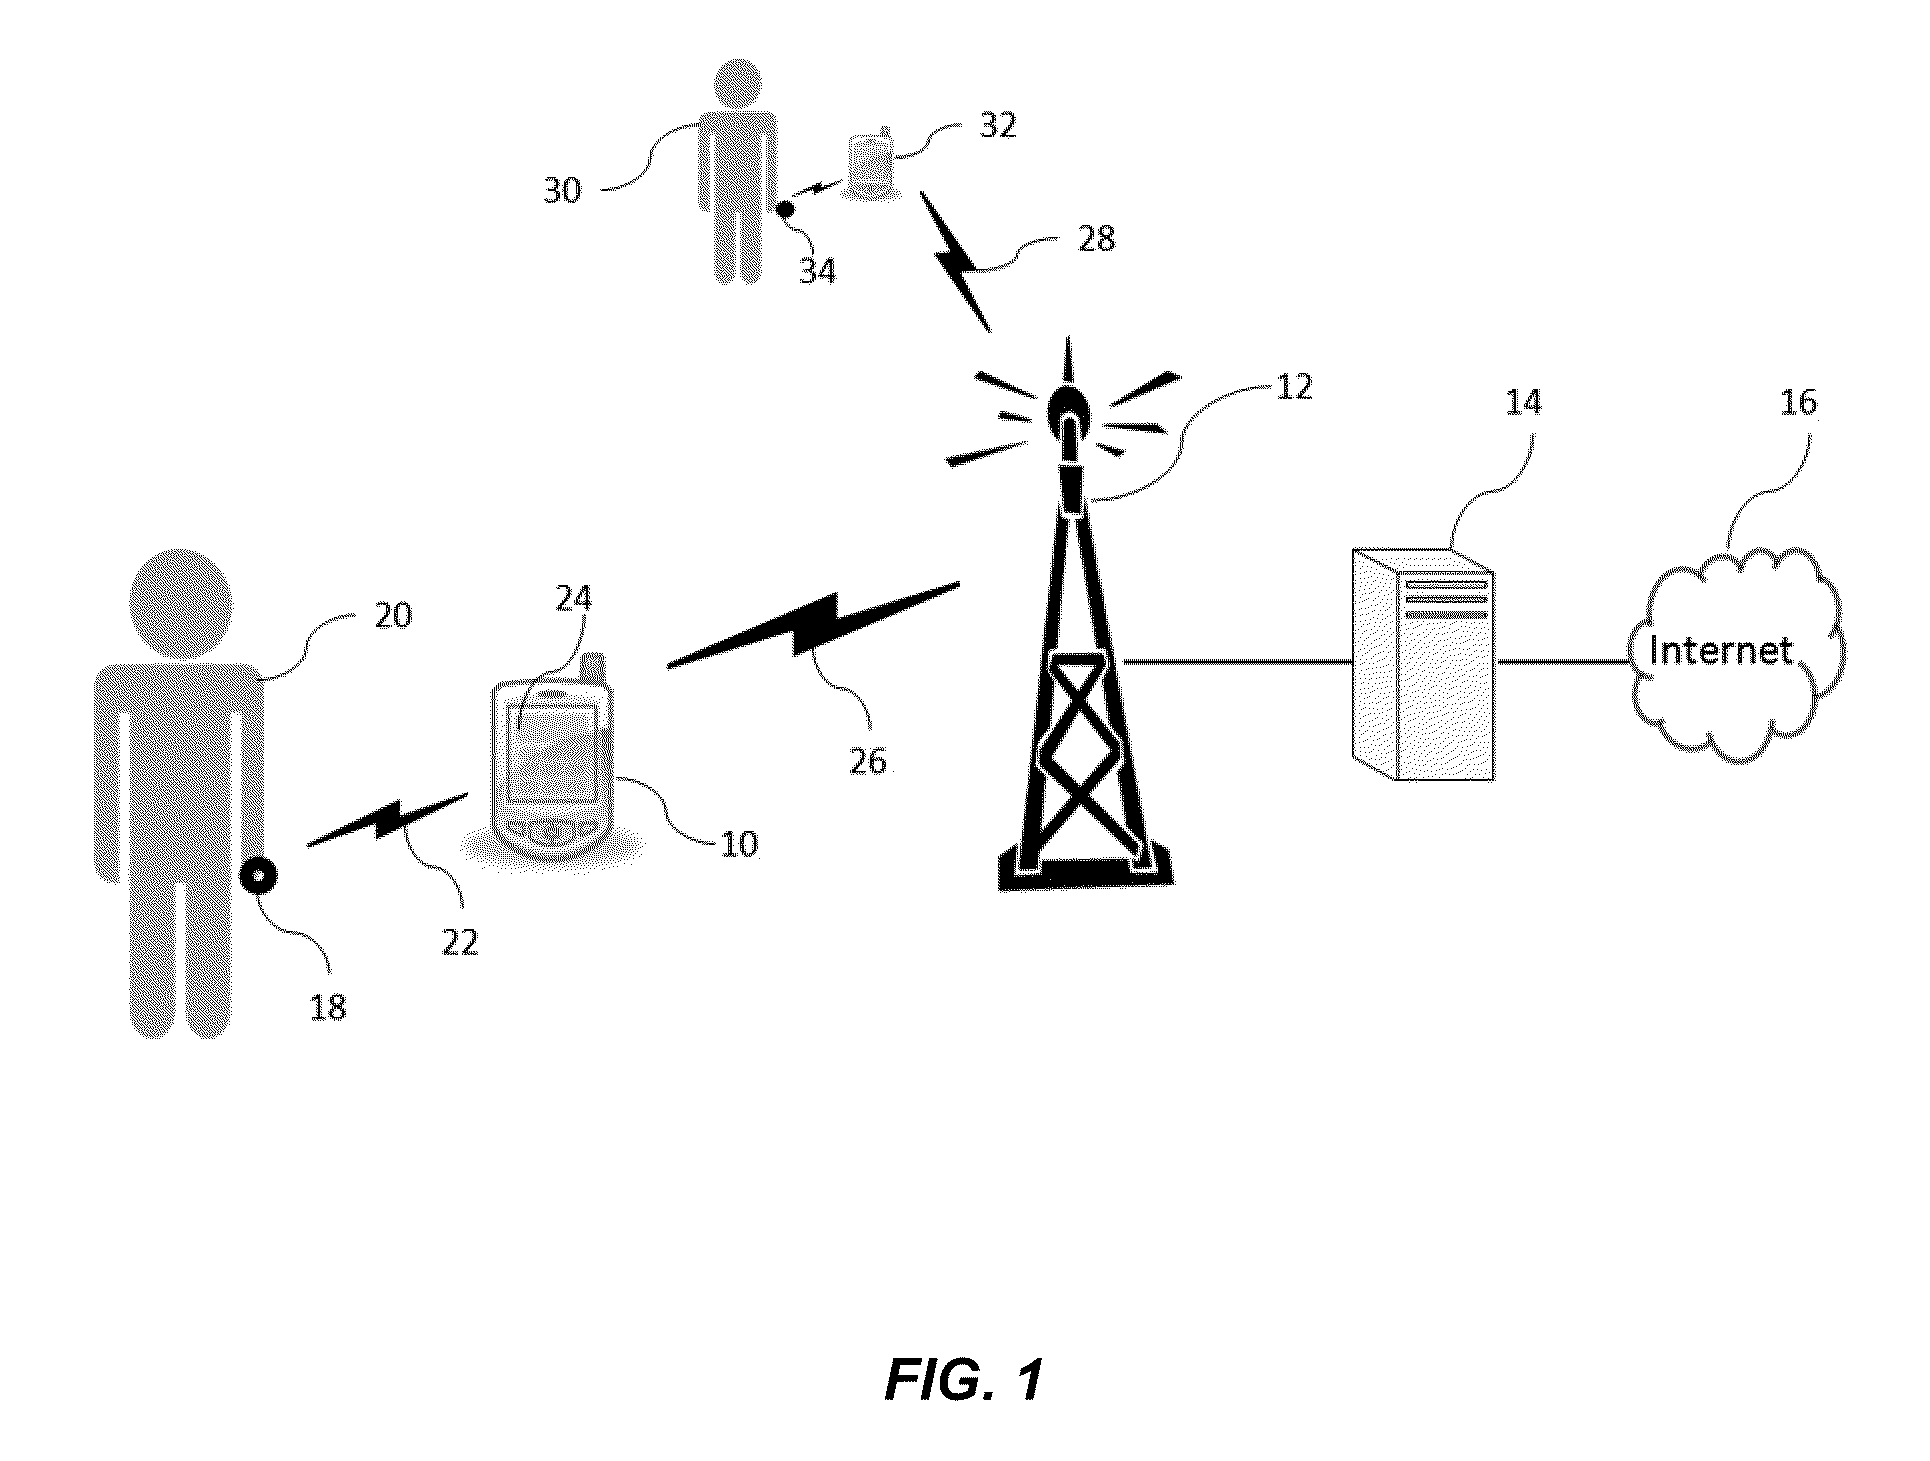 Method and apparatus for monitoring emotion in an interactive network